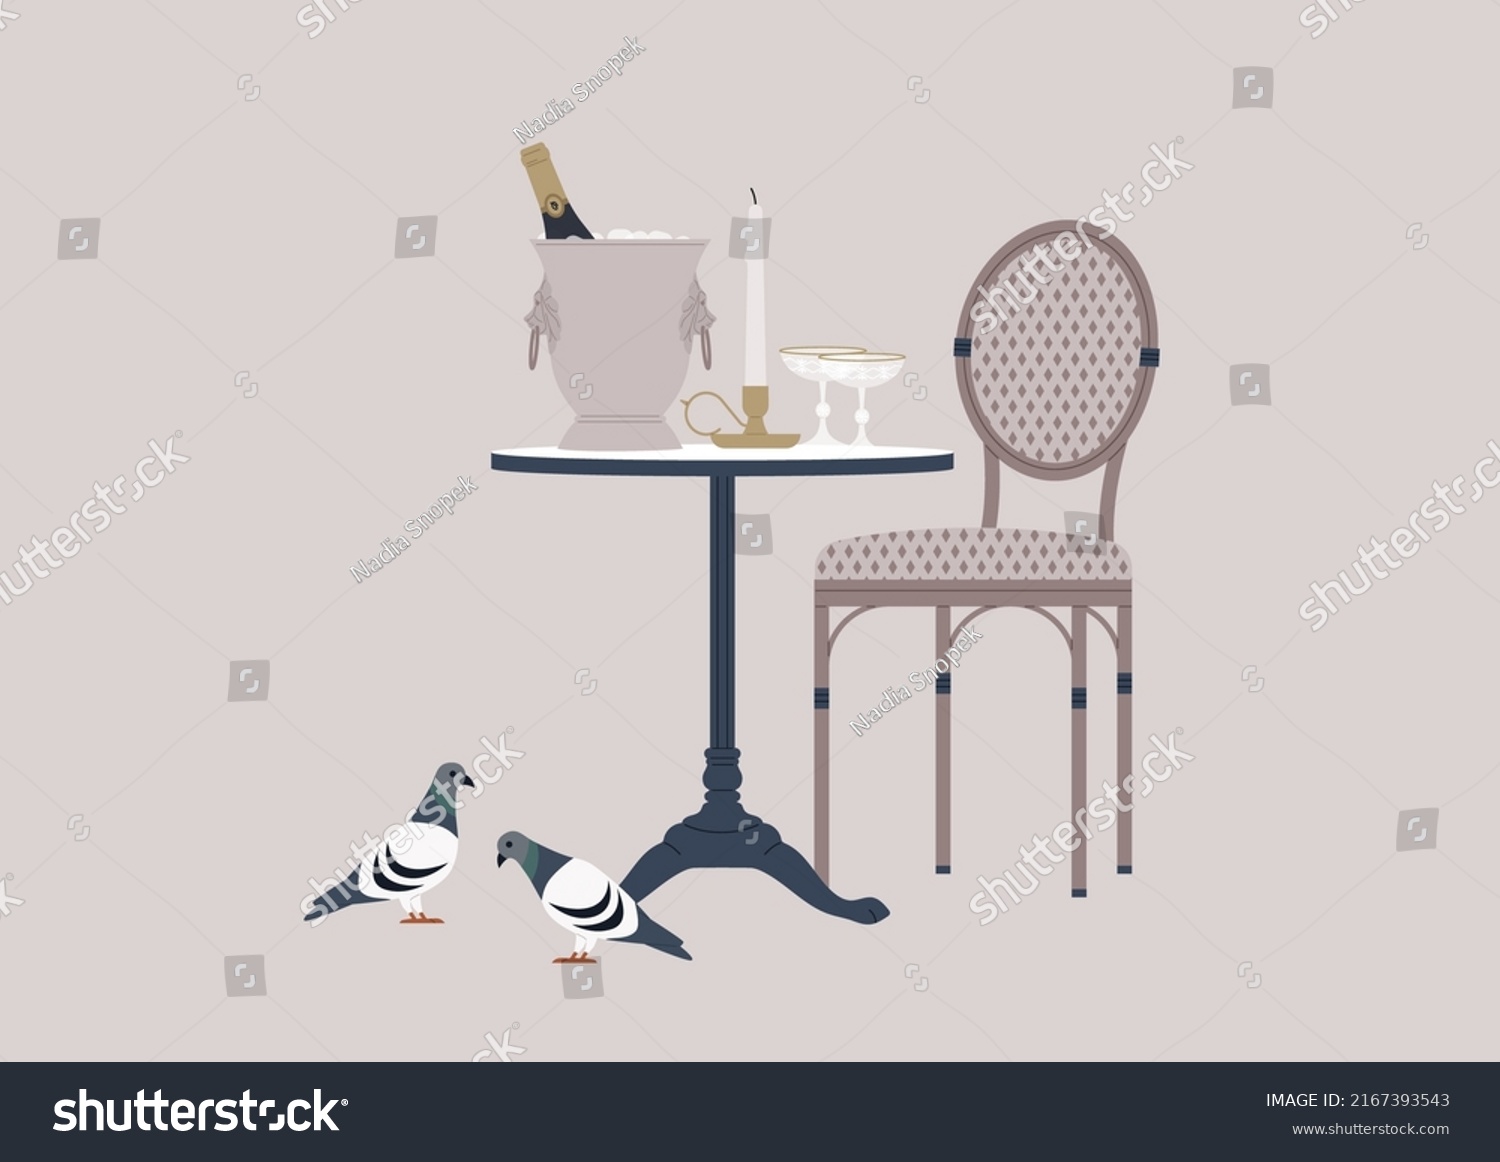 SVG of An outdoor french cafe table with a rattan chair, a champagne bucket, a candlestick, and sparkling wine glasses, pigeons walking nearby svg